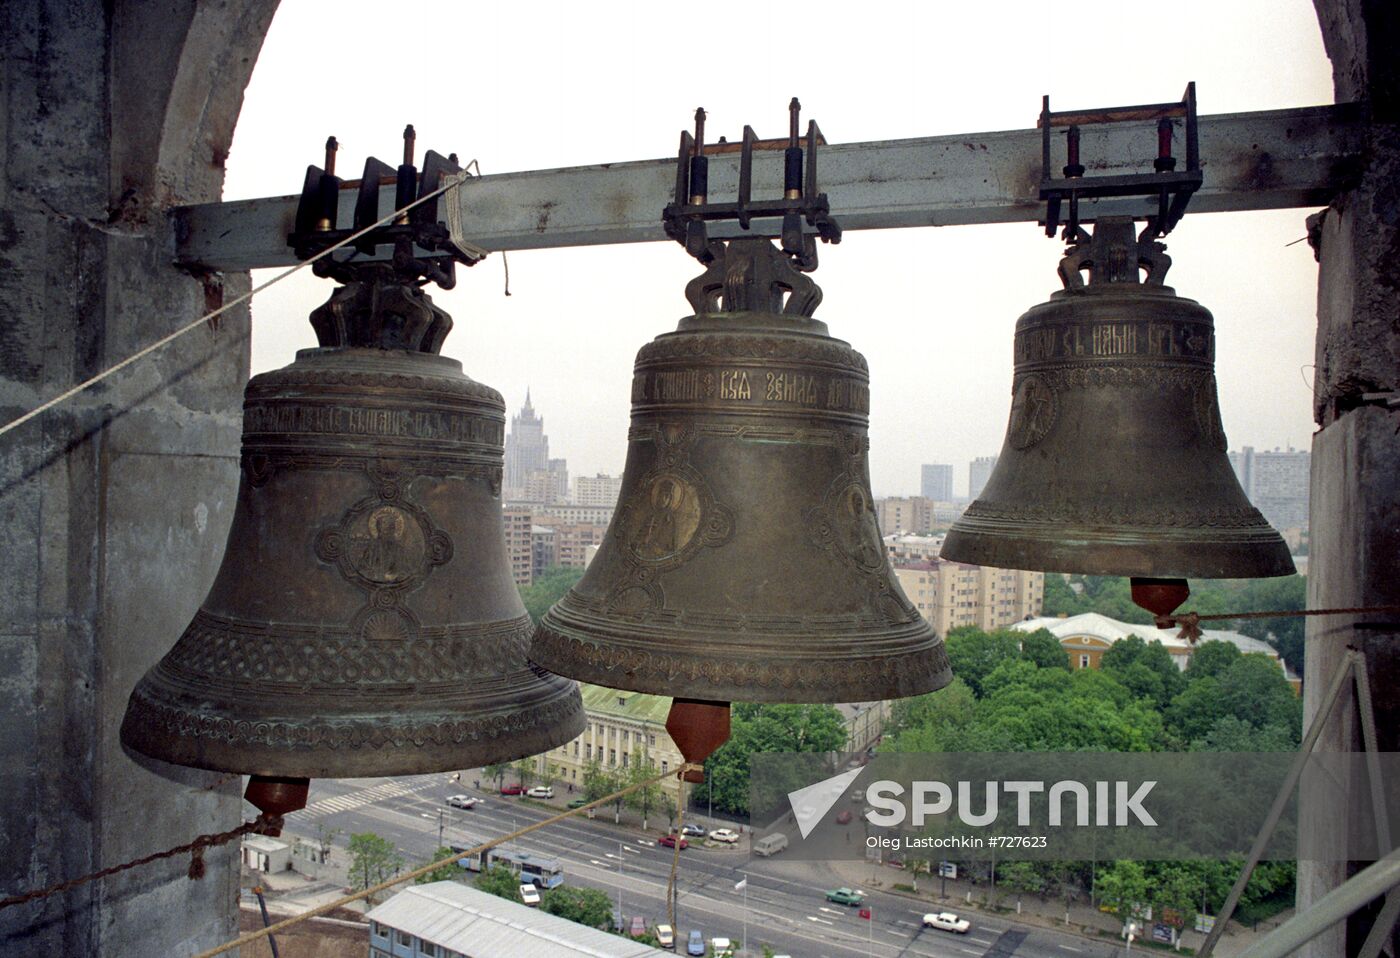 The smaller bells of the Cathedral of Christ the Saviour